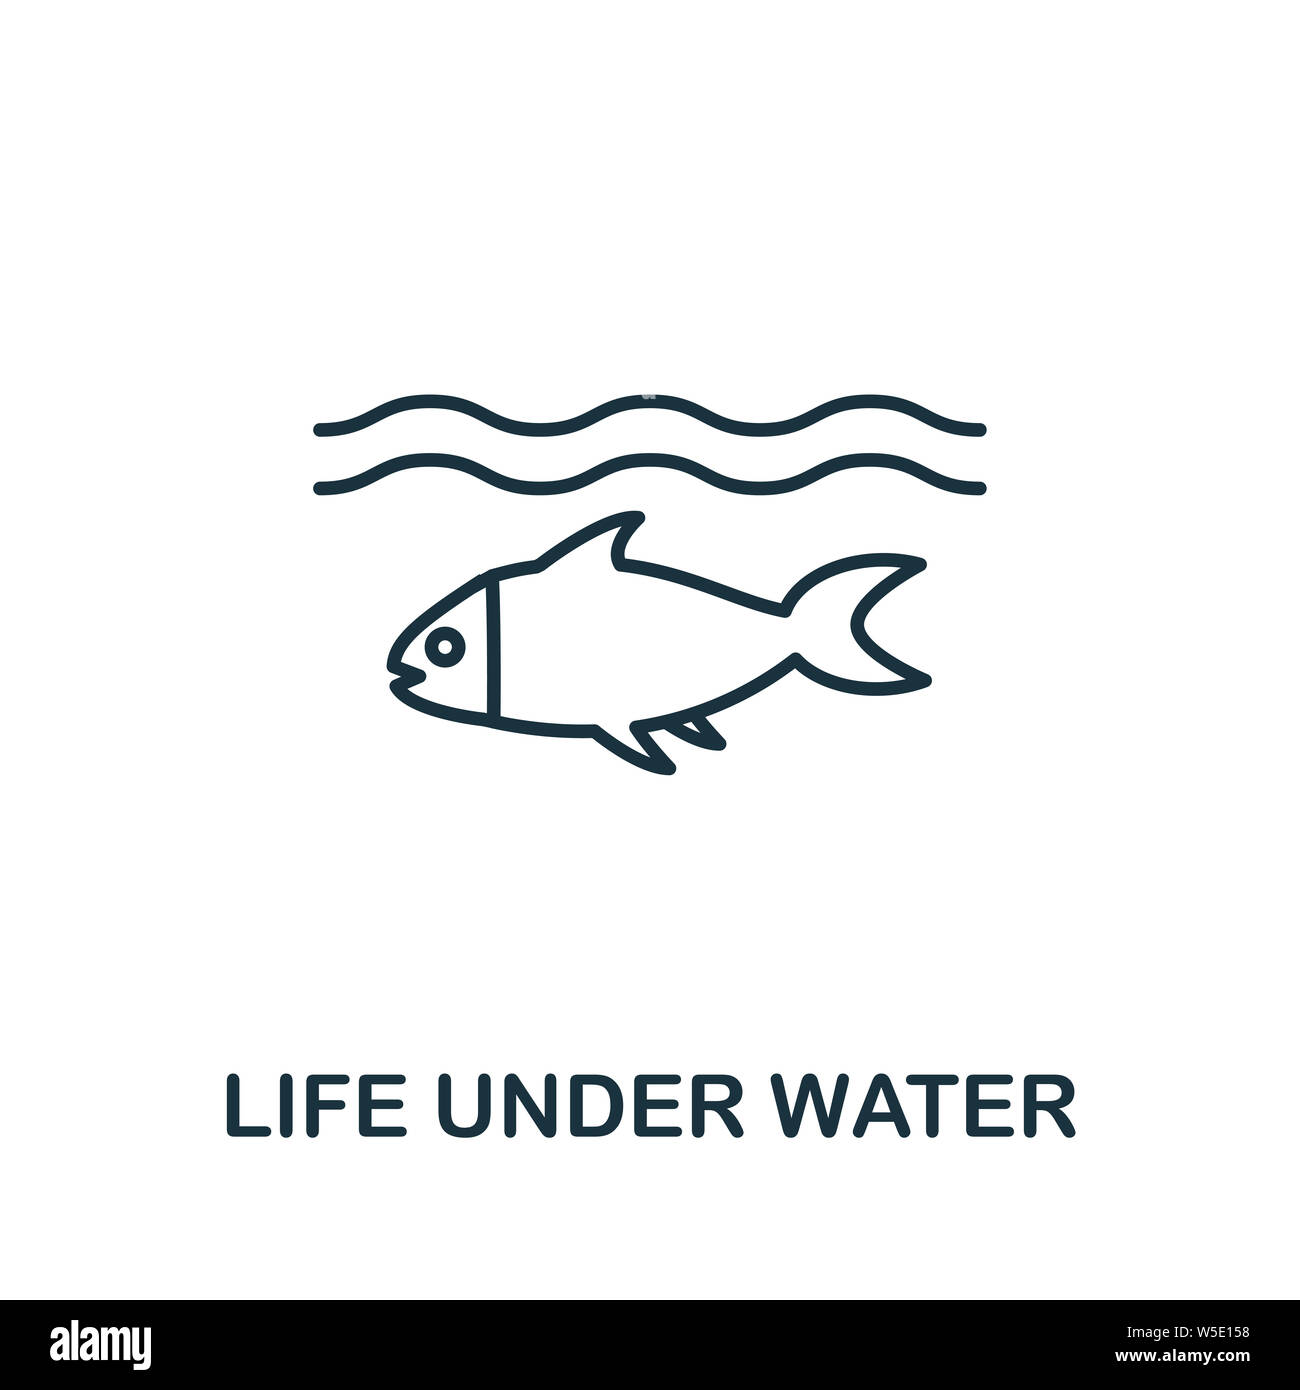 Life Under Water outline icon. Thin line style from community icons collection. Pixel perfect simple element life under water icon for web design Stock Photo